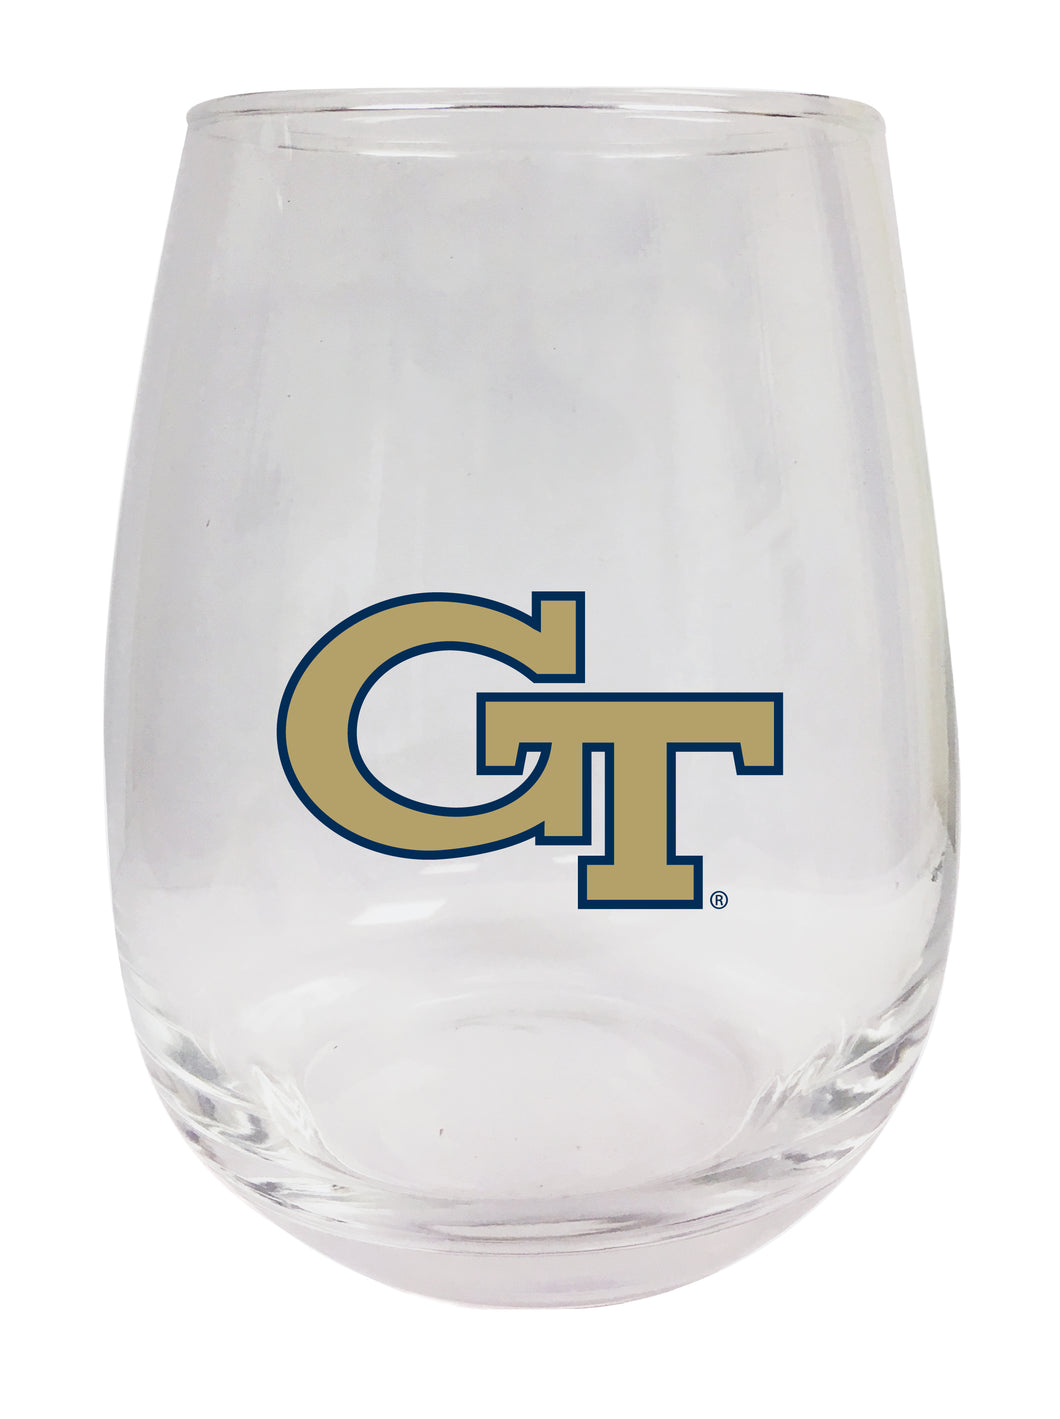 Georgia Tech Yellow Jackets Stemless Wine Glass - 9 oz. | Officially Licensed NCAA Merchandise